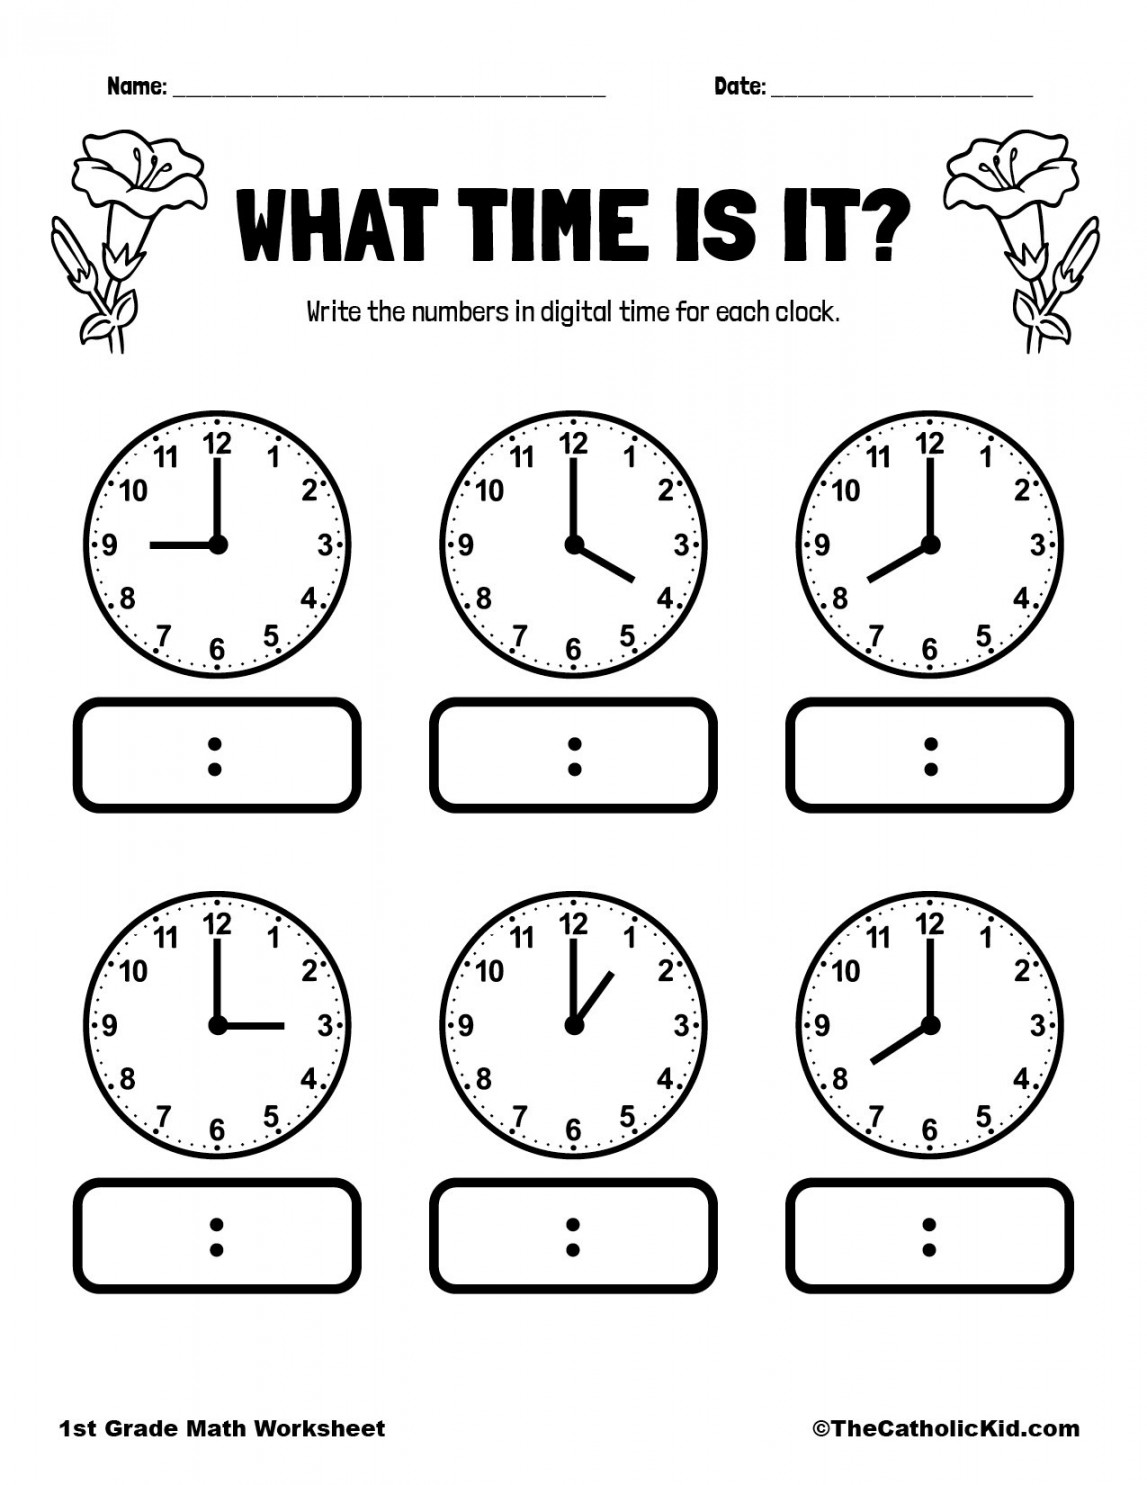 What Time is it? Printout - TheCatholicKid